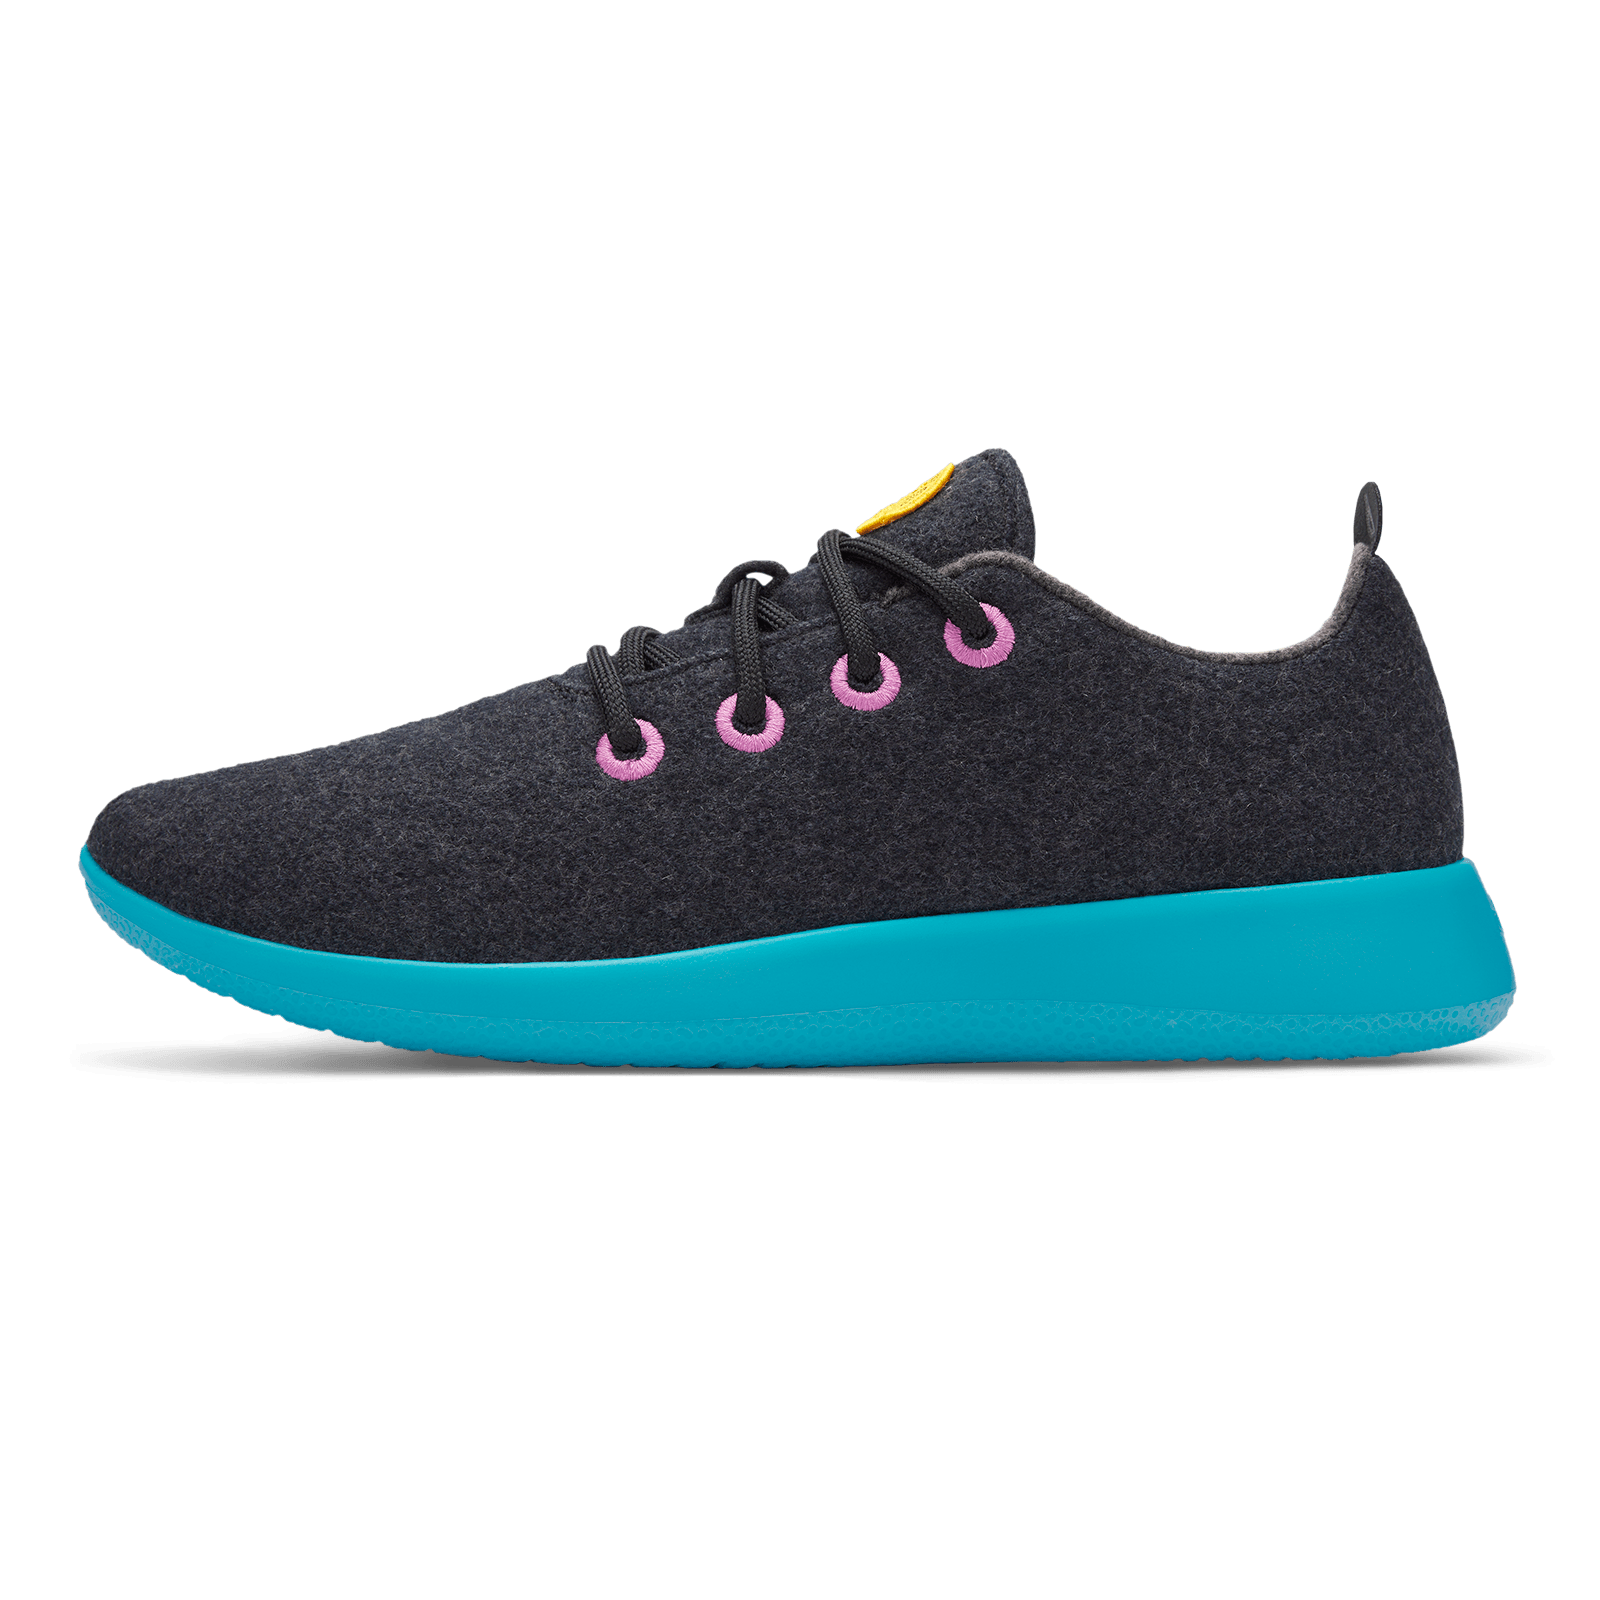 Men's Wool Runners - Natural Black (Thrive Teal Sole)